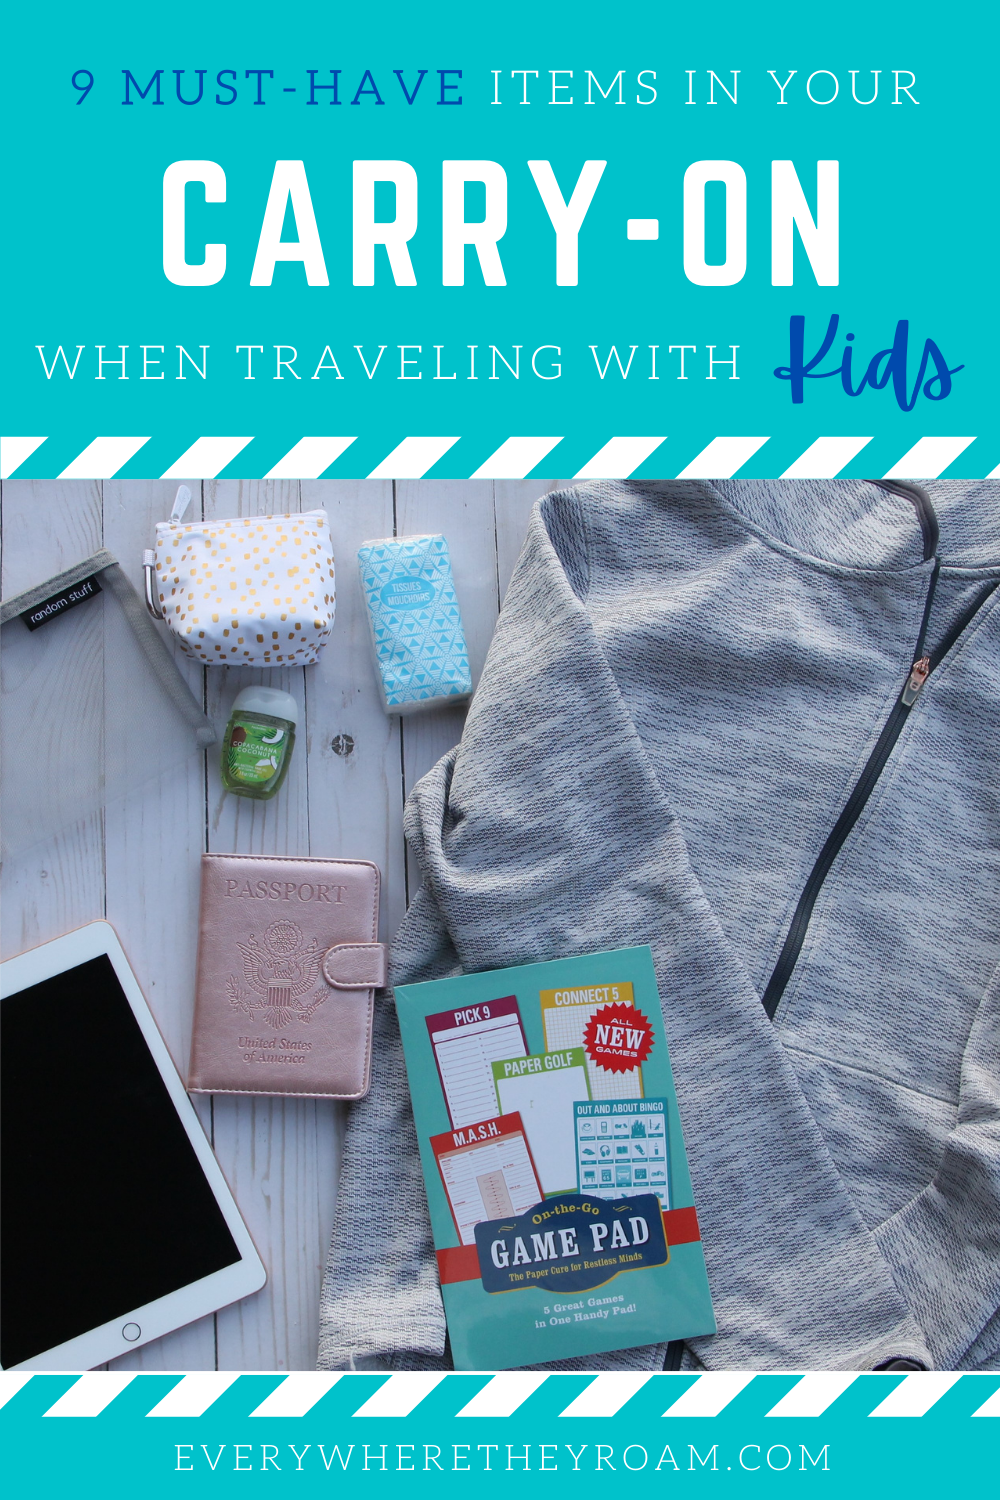 Pinterest post image for 9 must have items in your carry on when traveling with kids